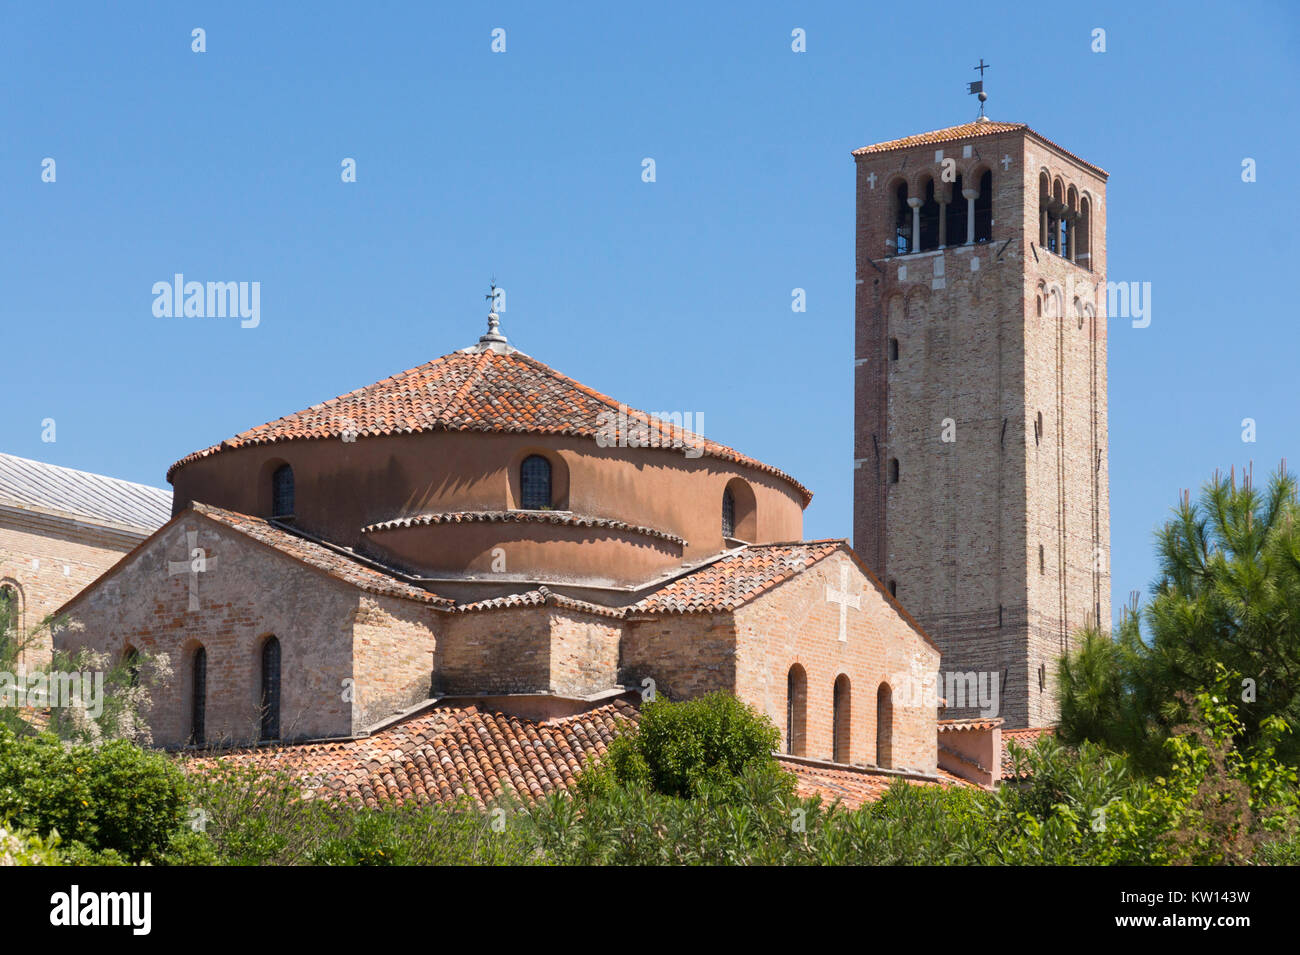 The striking Romanesque Torcello Basilica (Church of Santa Maria Assunta), the oldest building in the Venice lagoon, on the island of Torcello Stock Photo